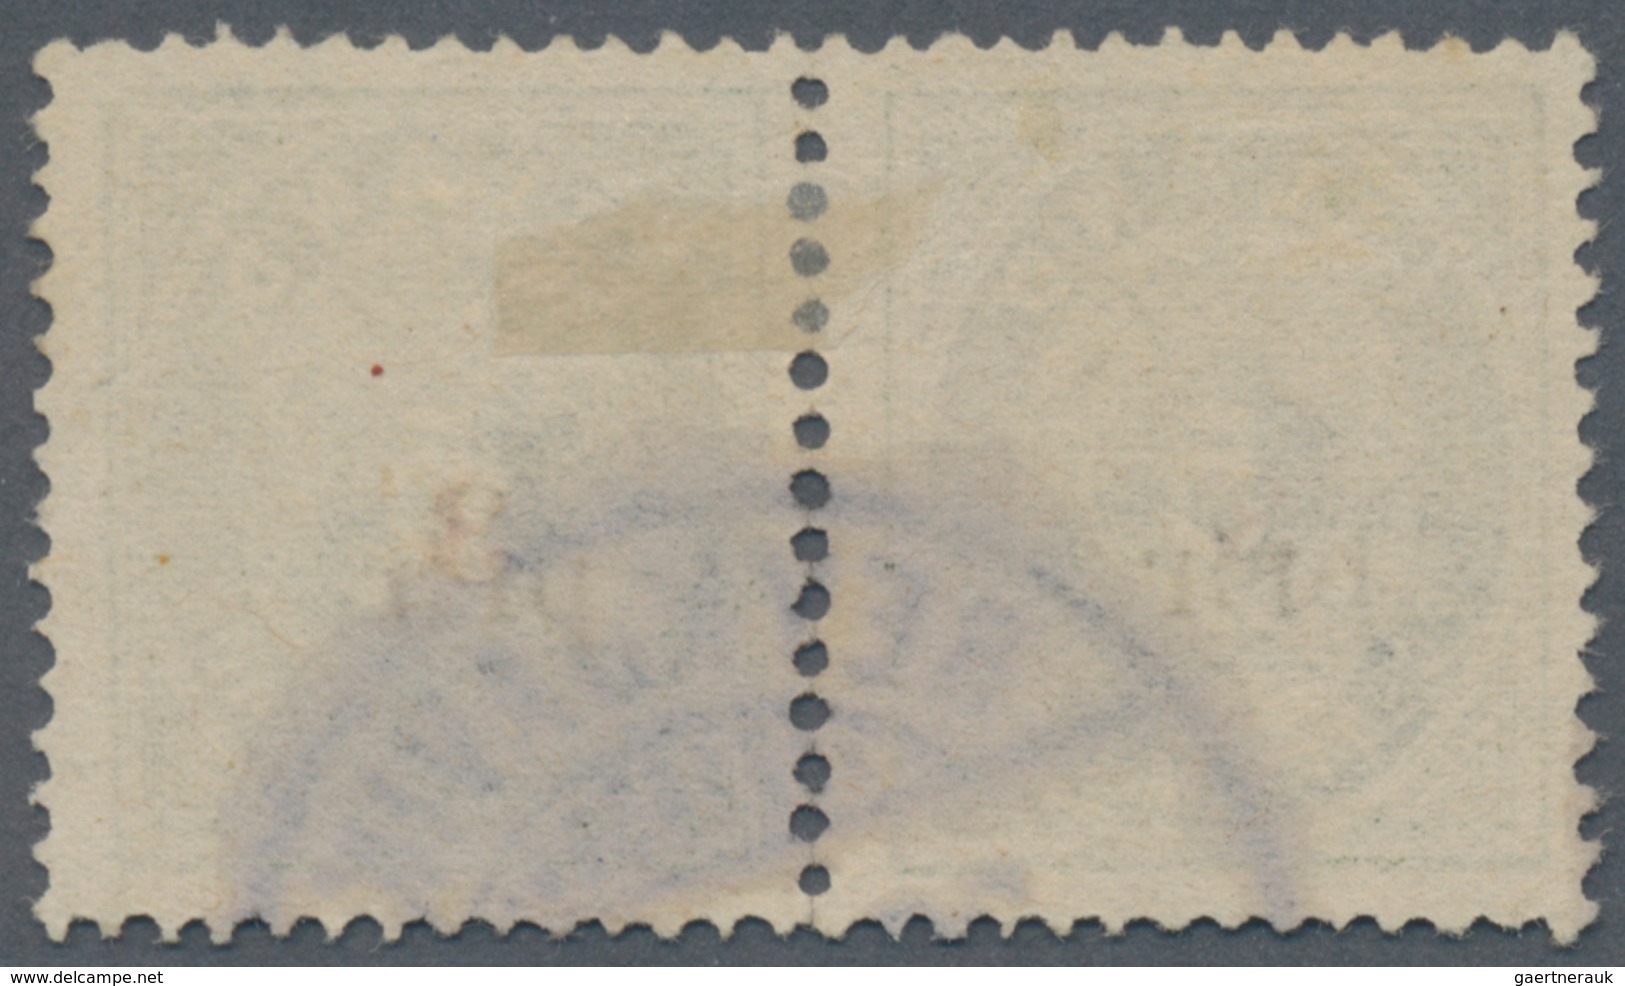 Island: 1897 Provisional 3 On 5a. Green HORIZONTAL PAIR, Perf 14x13½, Overprinted "3" In Red And LAR - Sonstige & Ohne Zuordnung